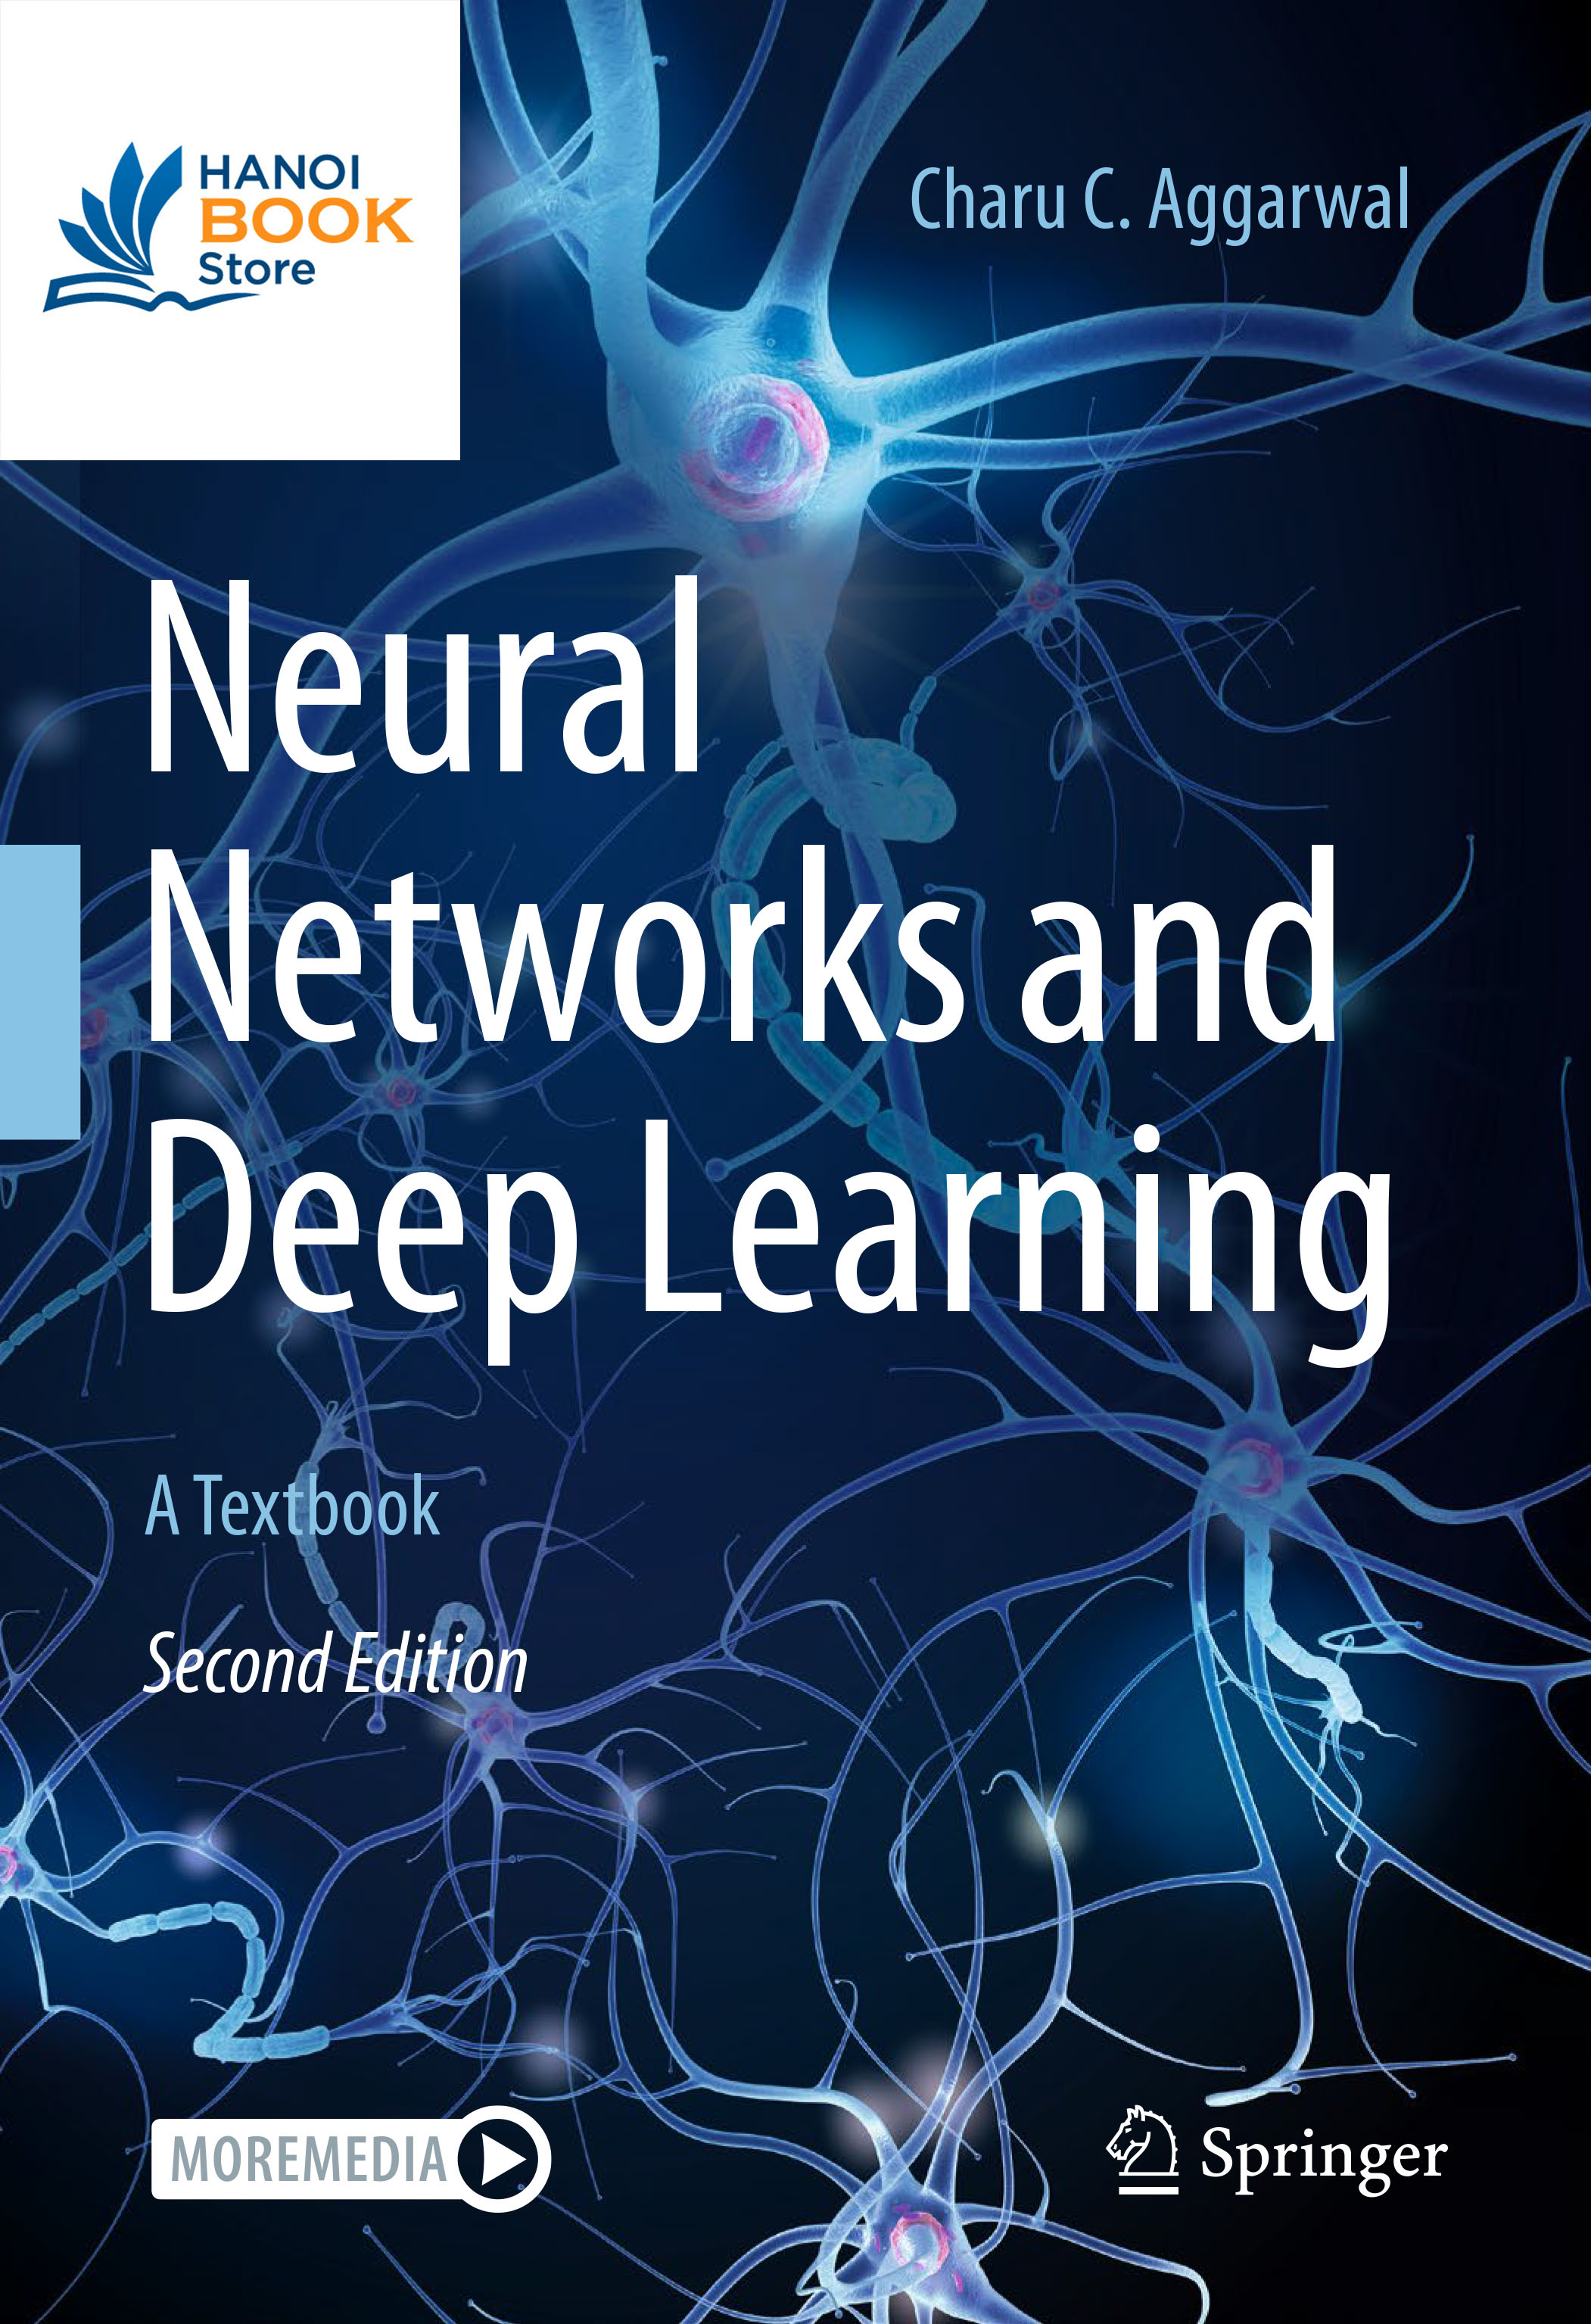 Neural Networks and Deep Learning A Textbook